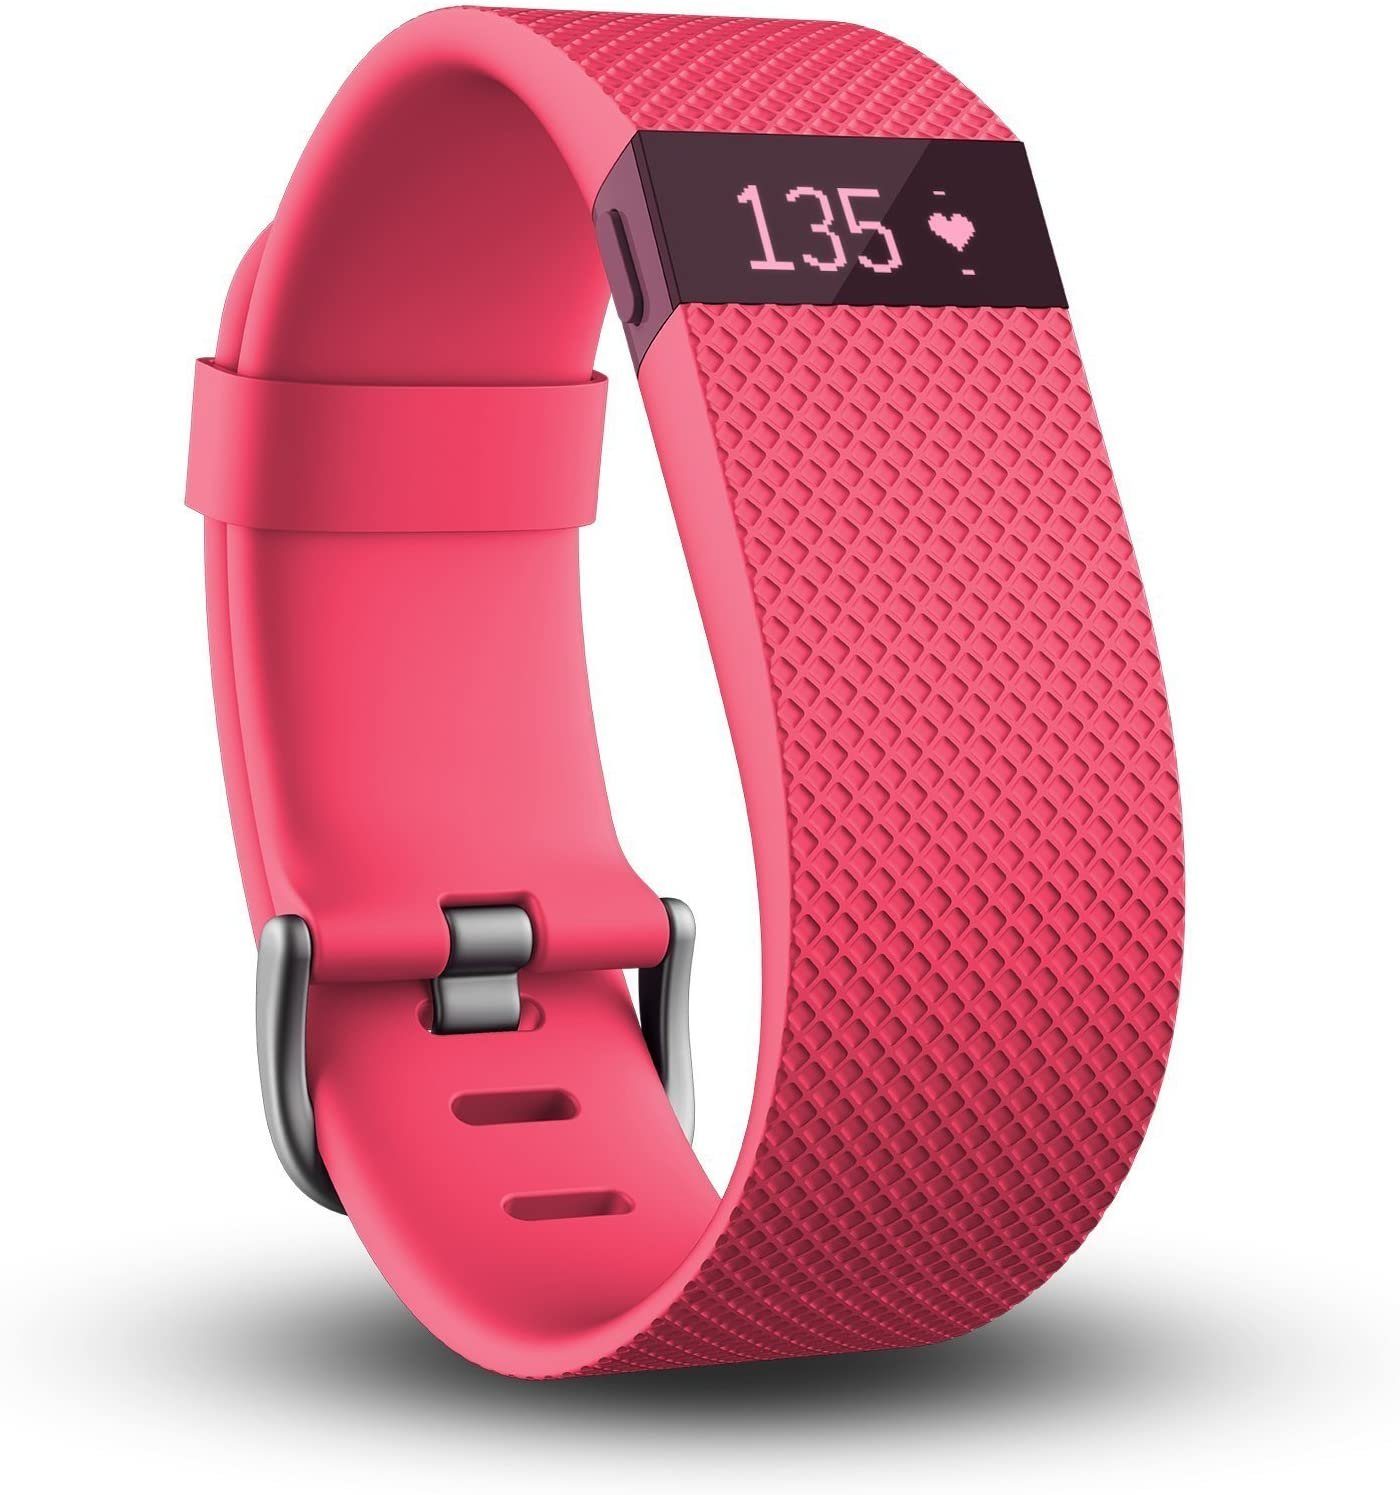 Small Sportuhr fitbit pink fitbit PFLAUME HR CHARGE